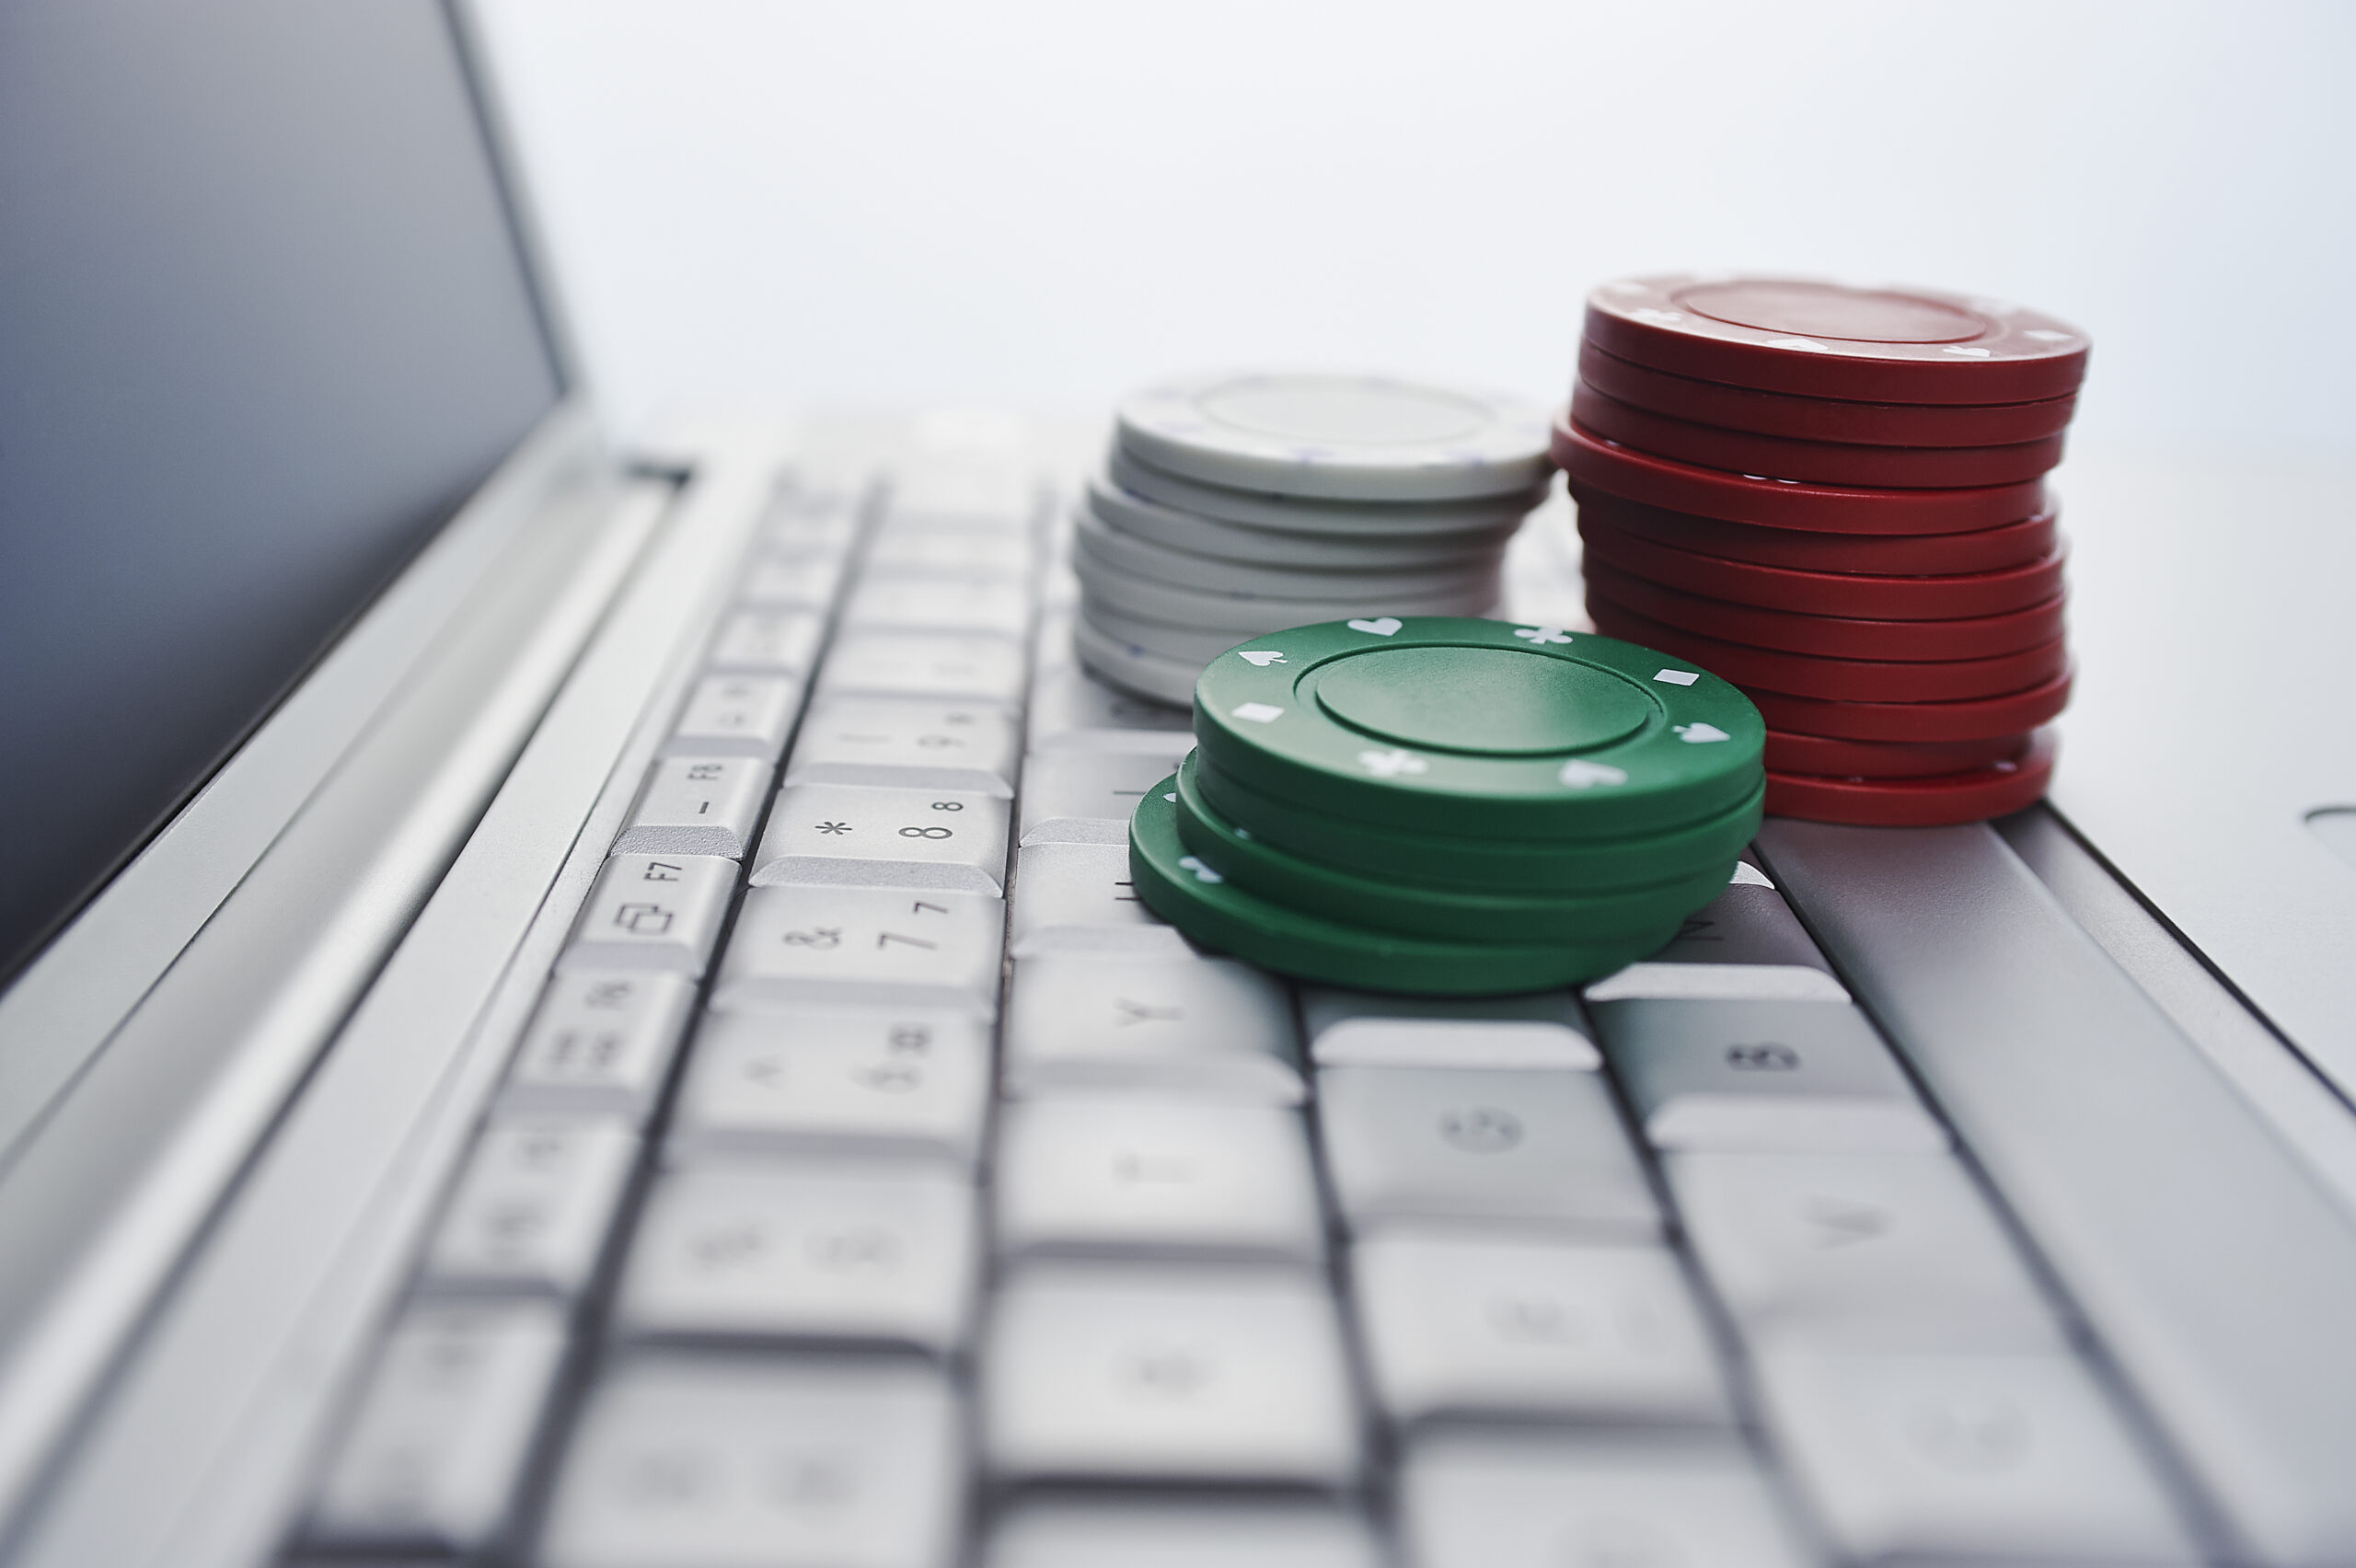 Online gambling is the next frontier for Indiana